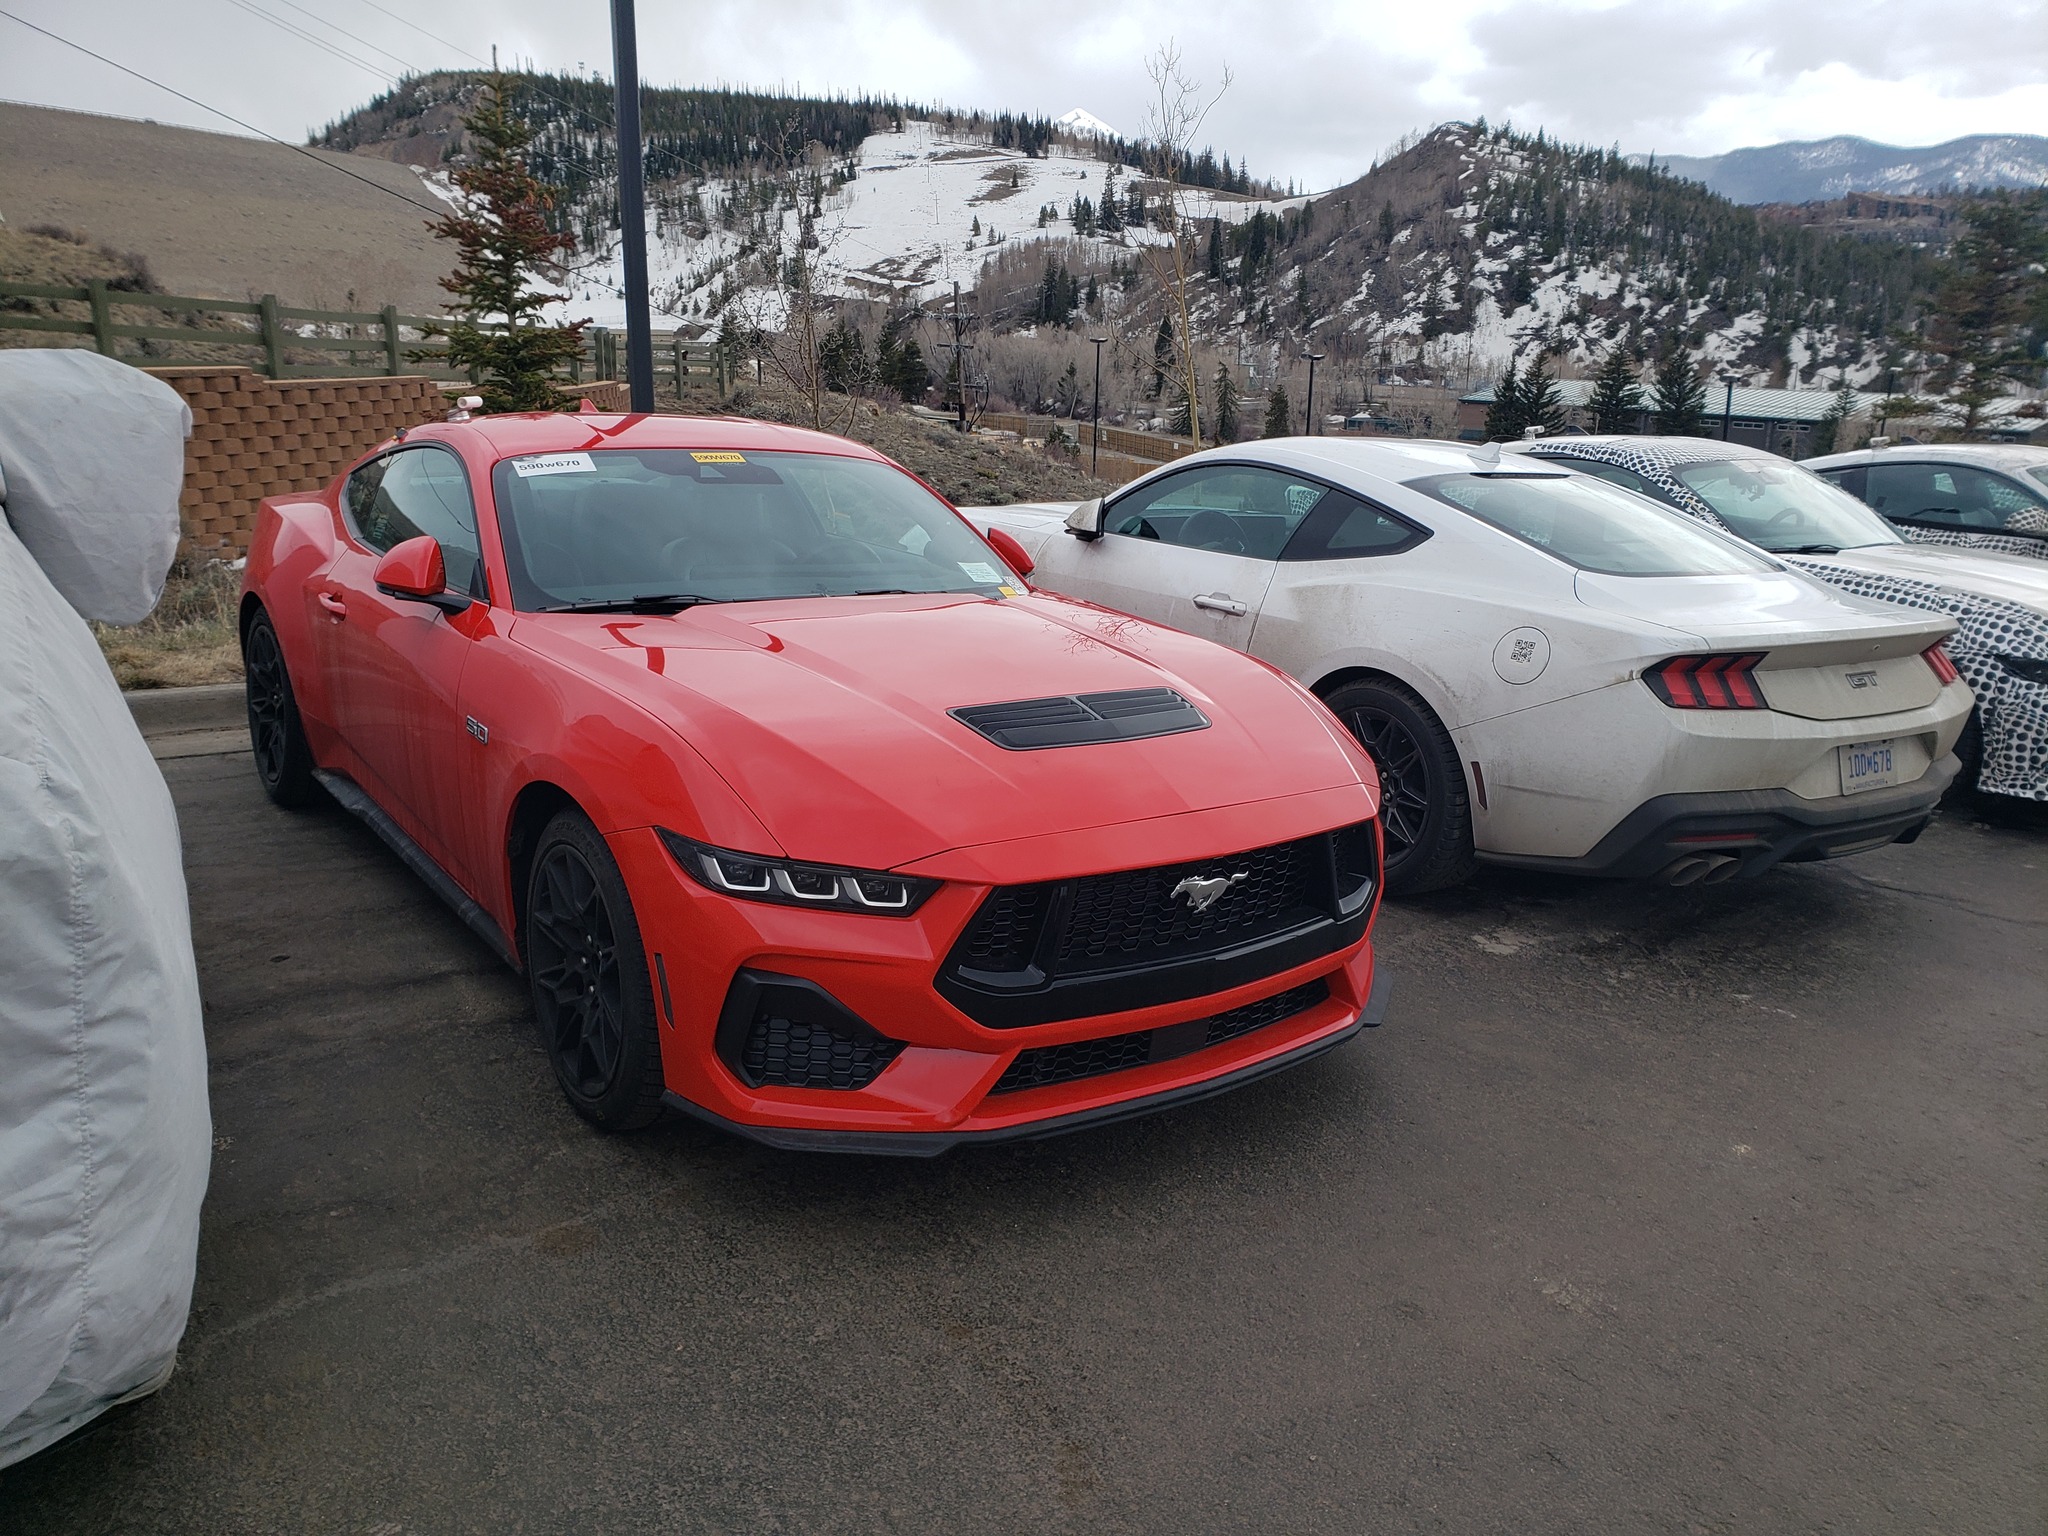 S650 Mustang S650 Mustang global-market prototypes testing in Colorado S650 Camo 3